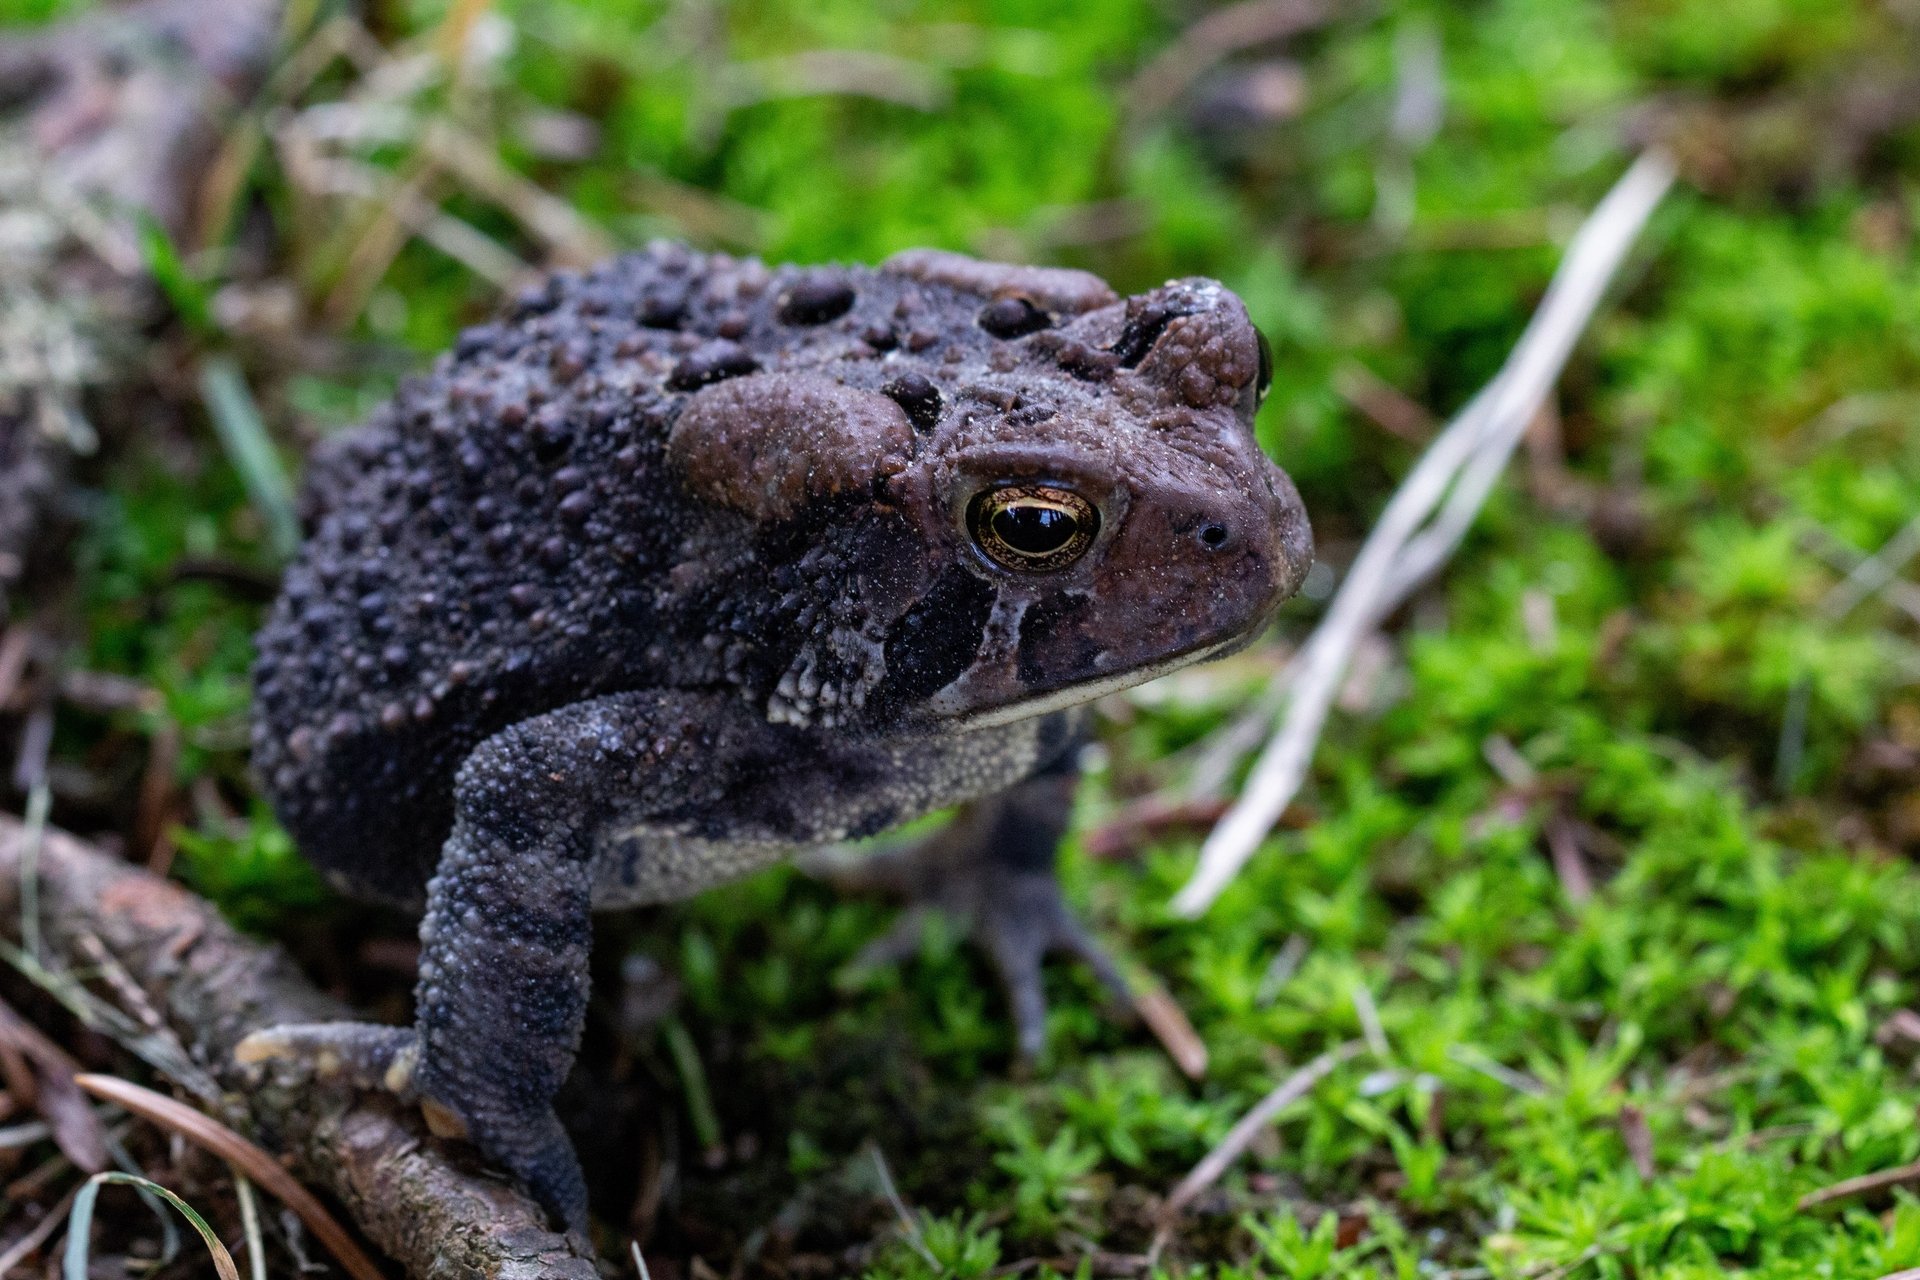 A gray, warty toad grips a twig with one hand while standing on a patch of moss.